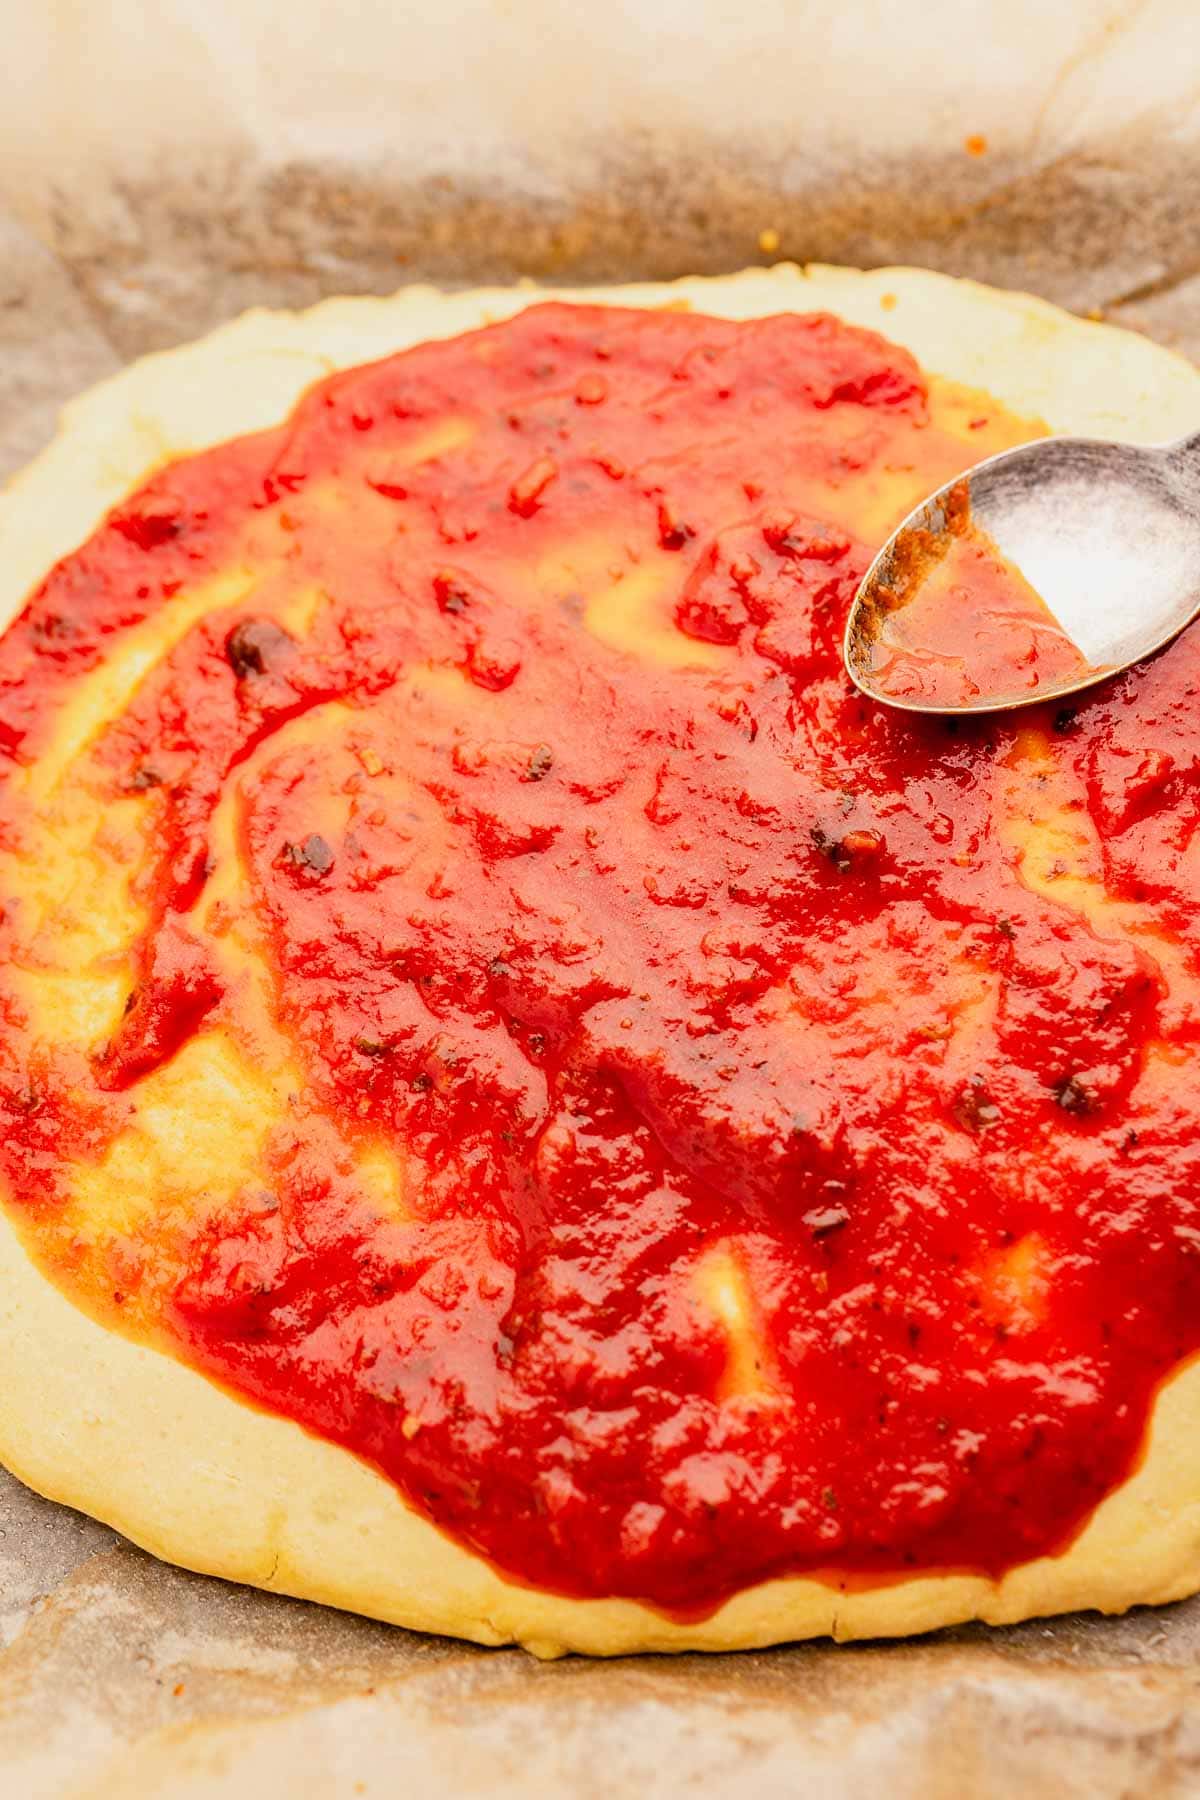 A homemade chickpea flour pizza crust topped with tomato sauce and a spoon resting on the surface, on parchment paper.